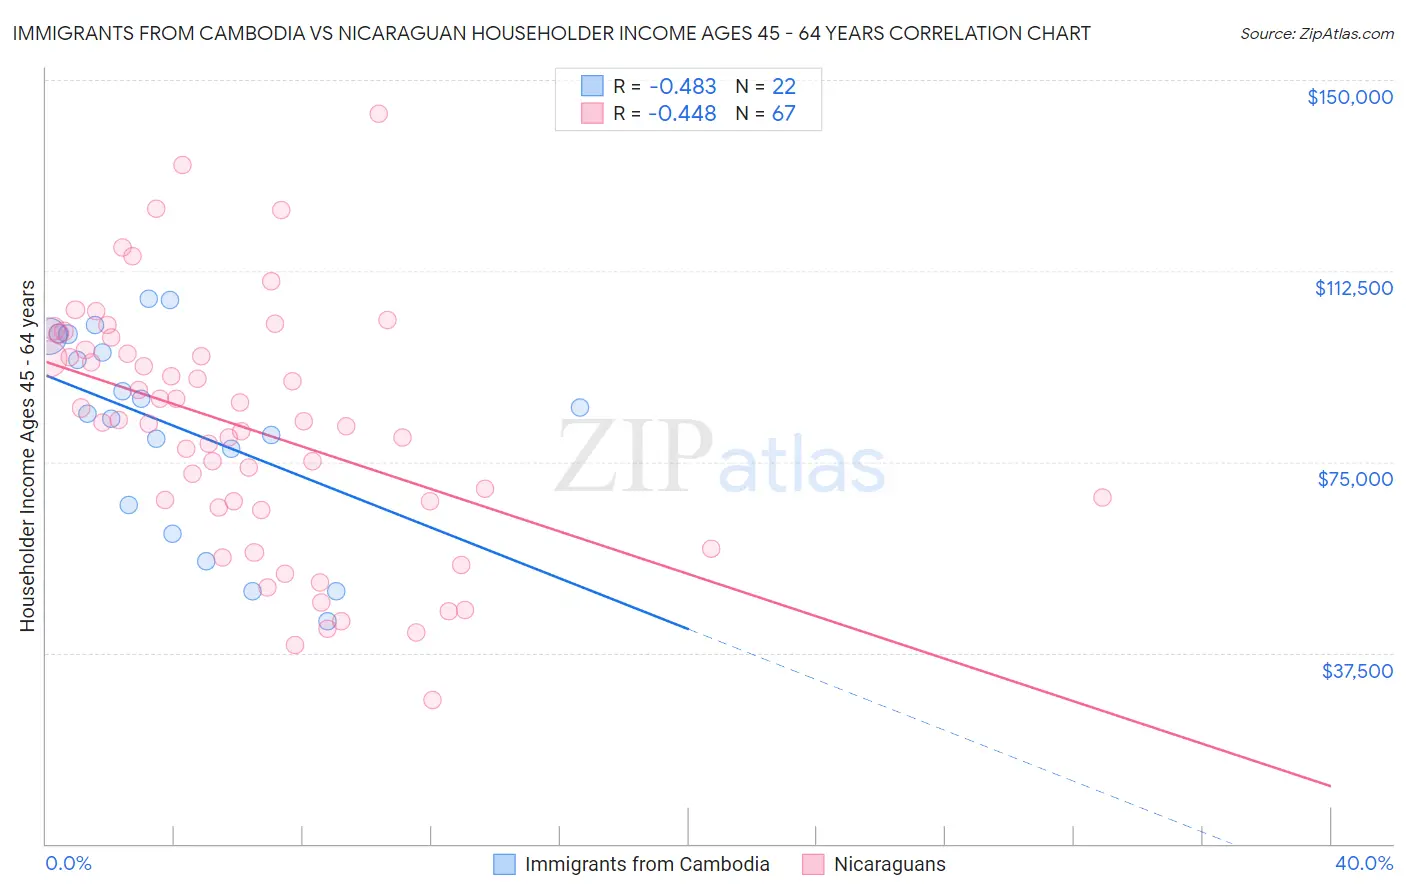 Immigrants from Cambodia vs Nicaraguan Householder Income Ages 45 - 64 years